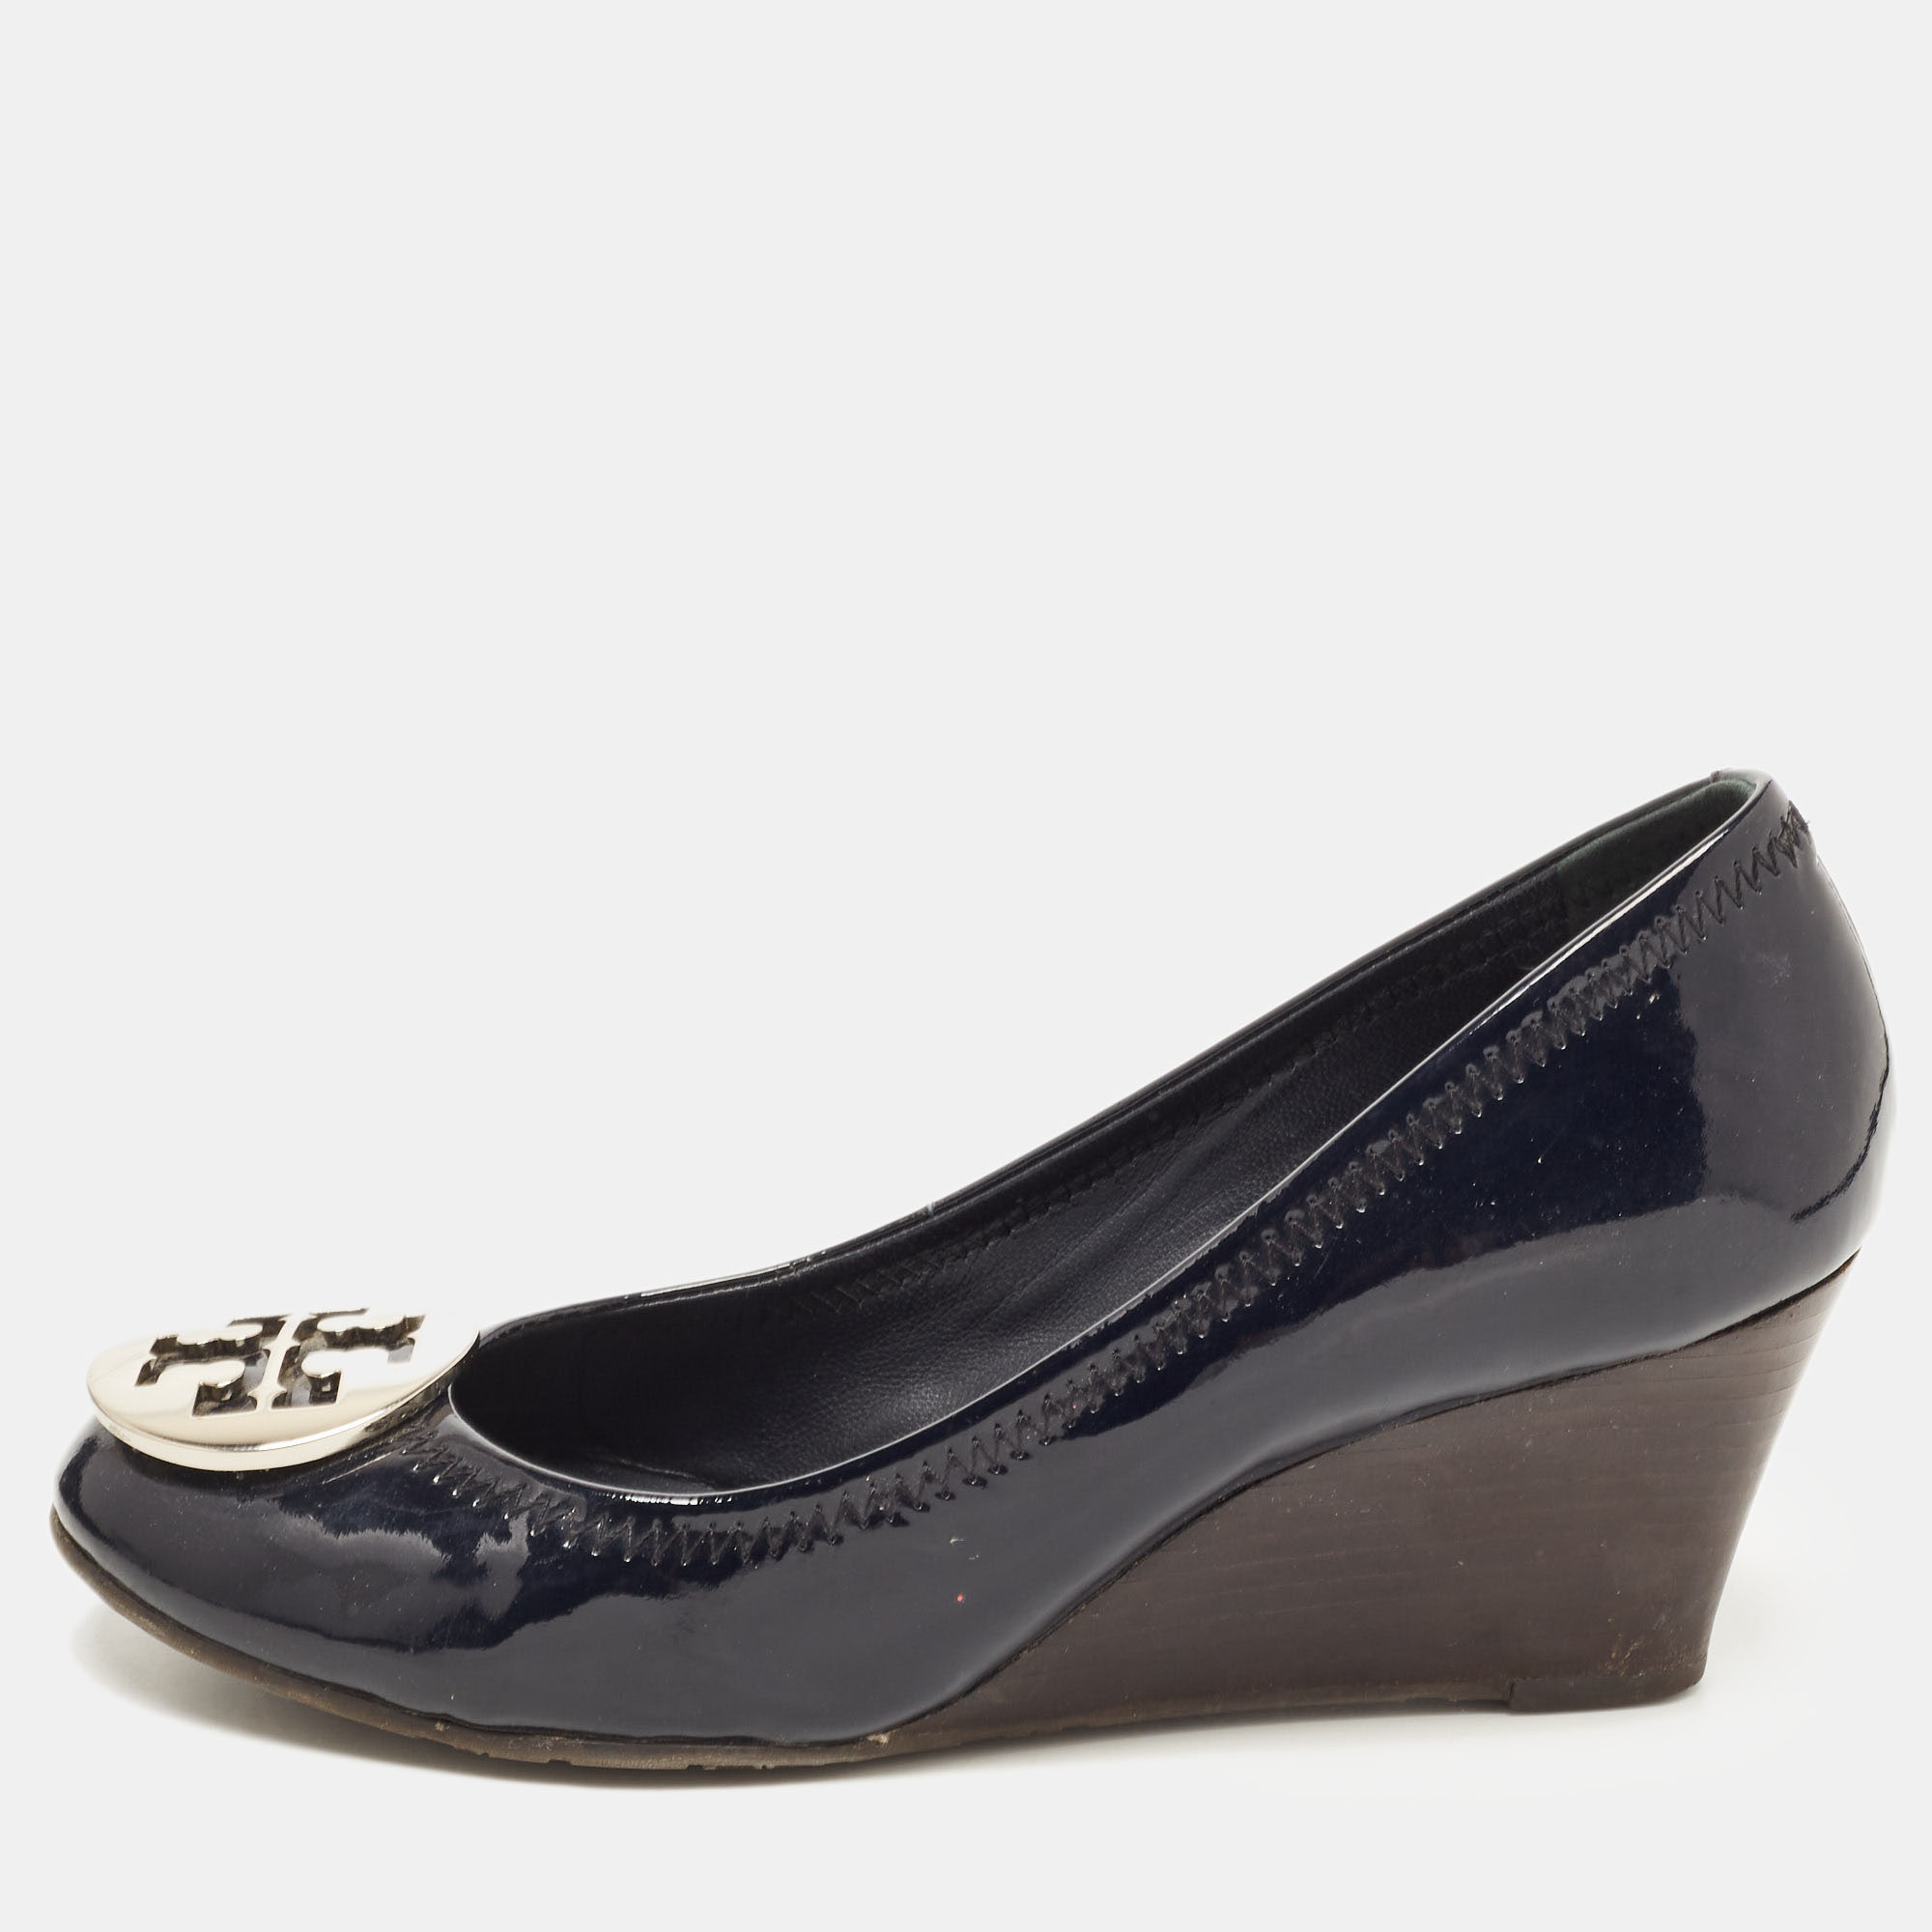 Pre-owned Tory Burch Navy Blue Patent Leather Wedge Pumps Size 36.5